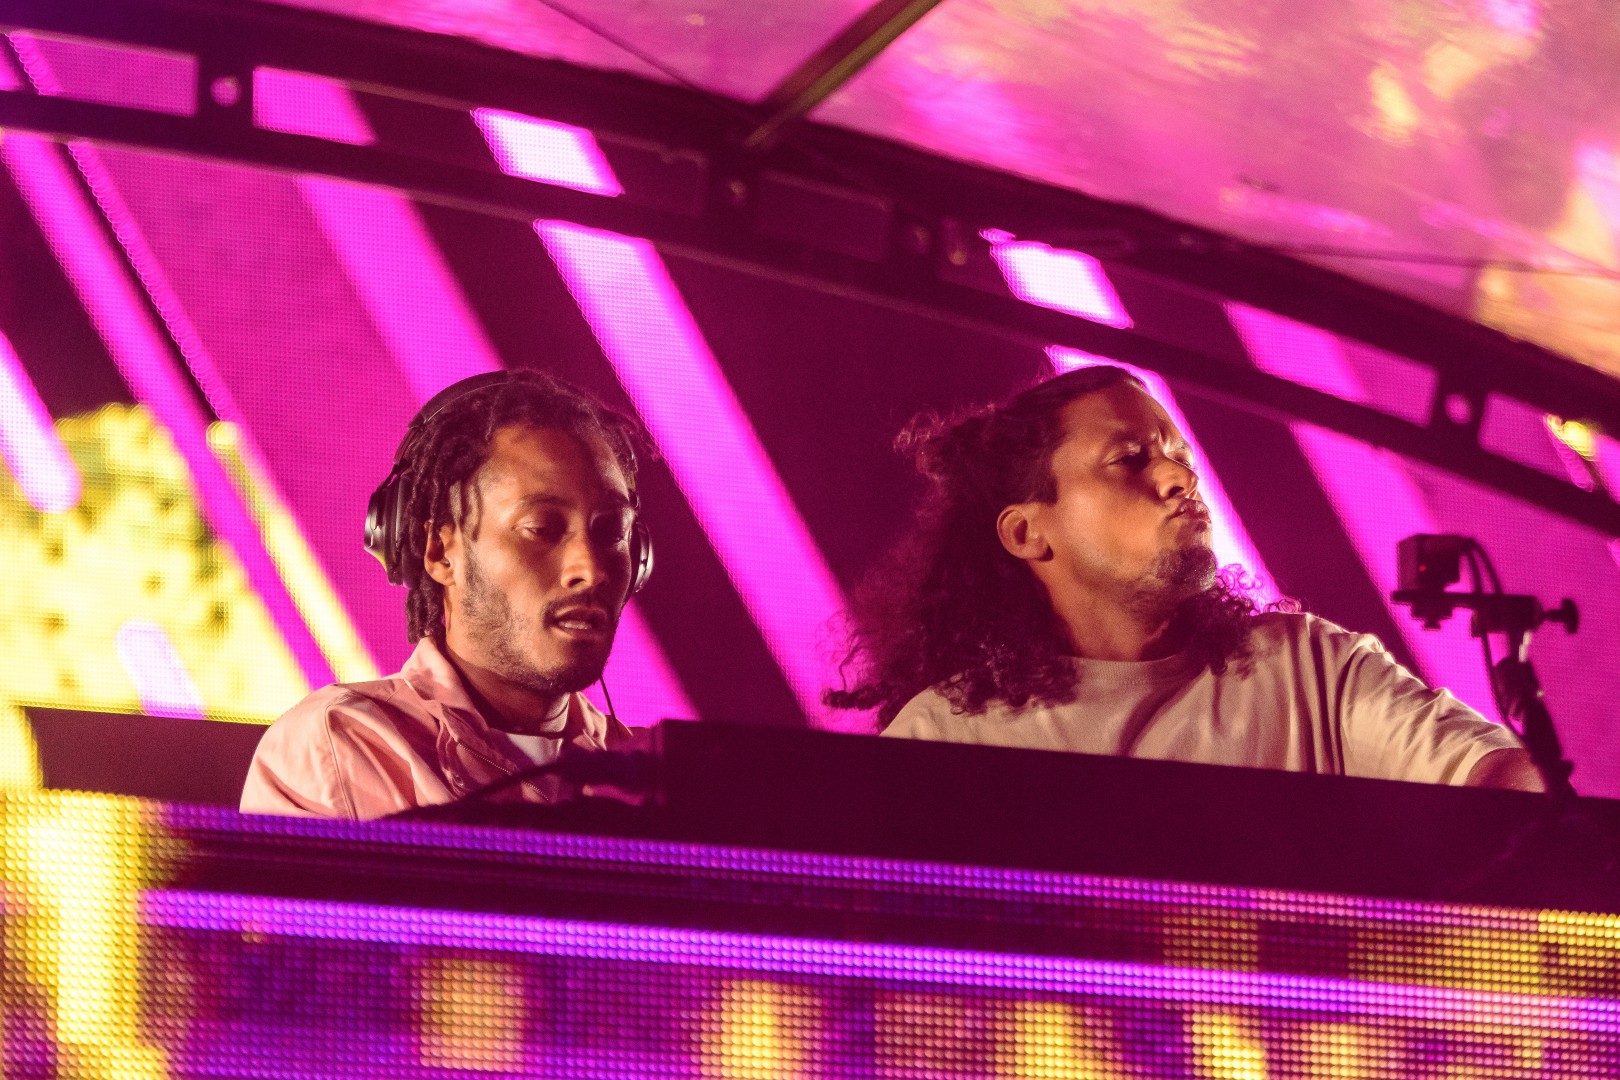 Sunnery James & Ryan Marciano at Romaero in Bucharest on September 10, 2021 (d6bb5dccc6)